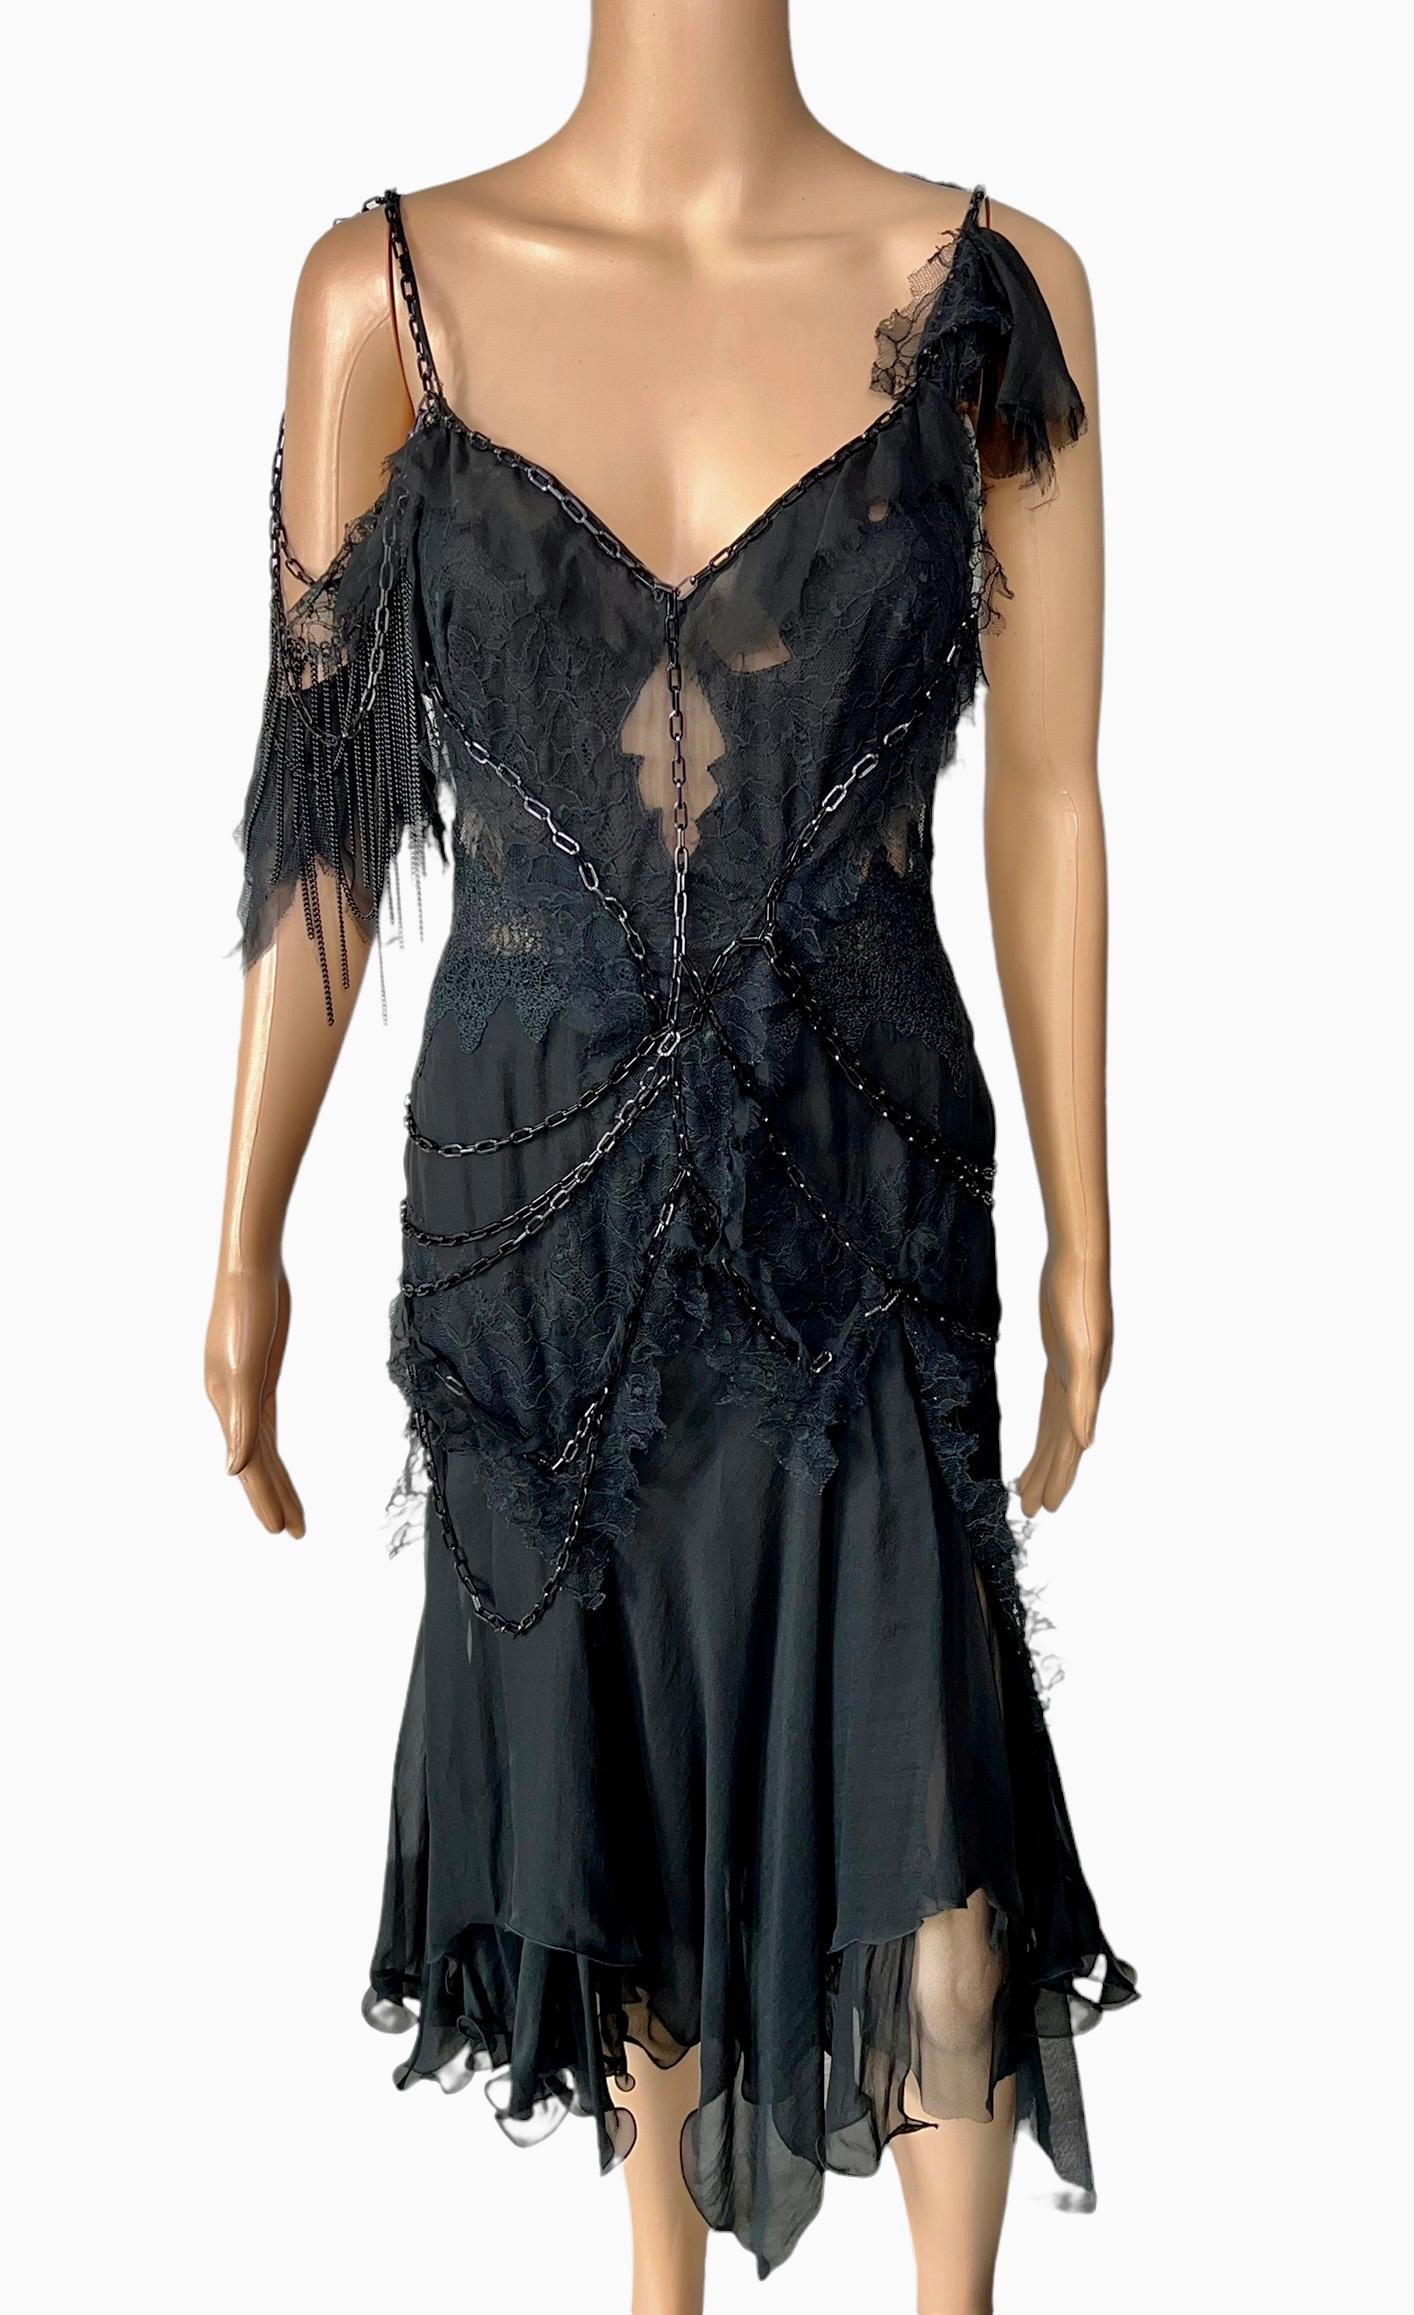 Versace F/W 2003 Runway Chain Embellished Sheer Lace Open Back Black Evening Dress Size IT 40




